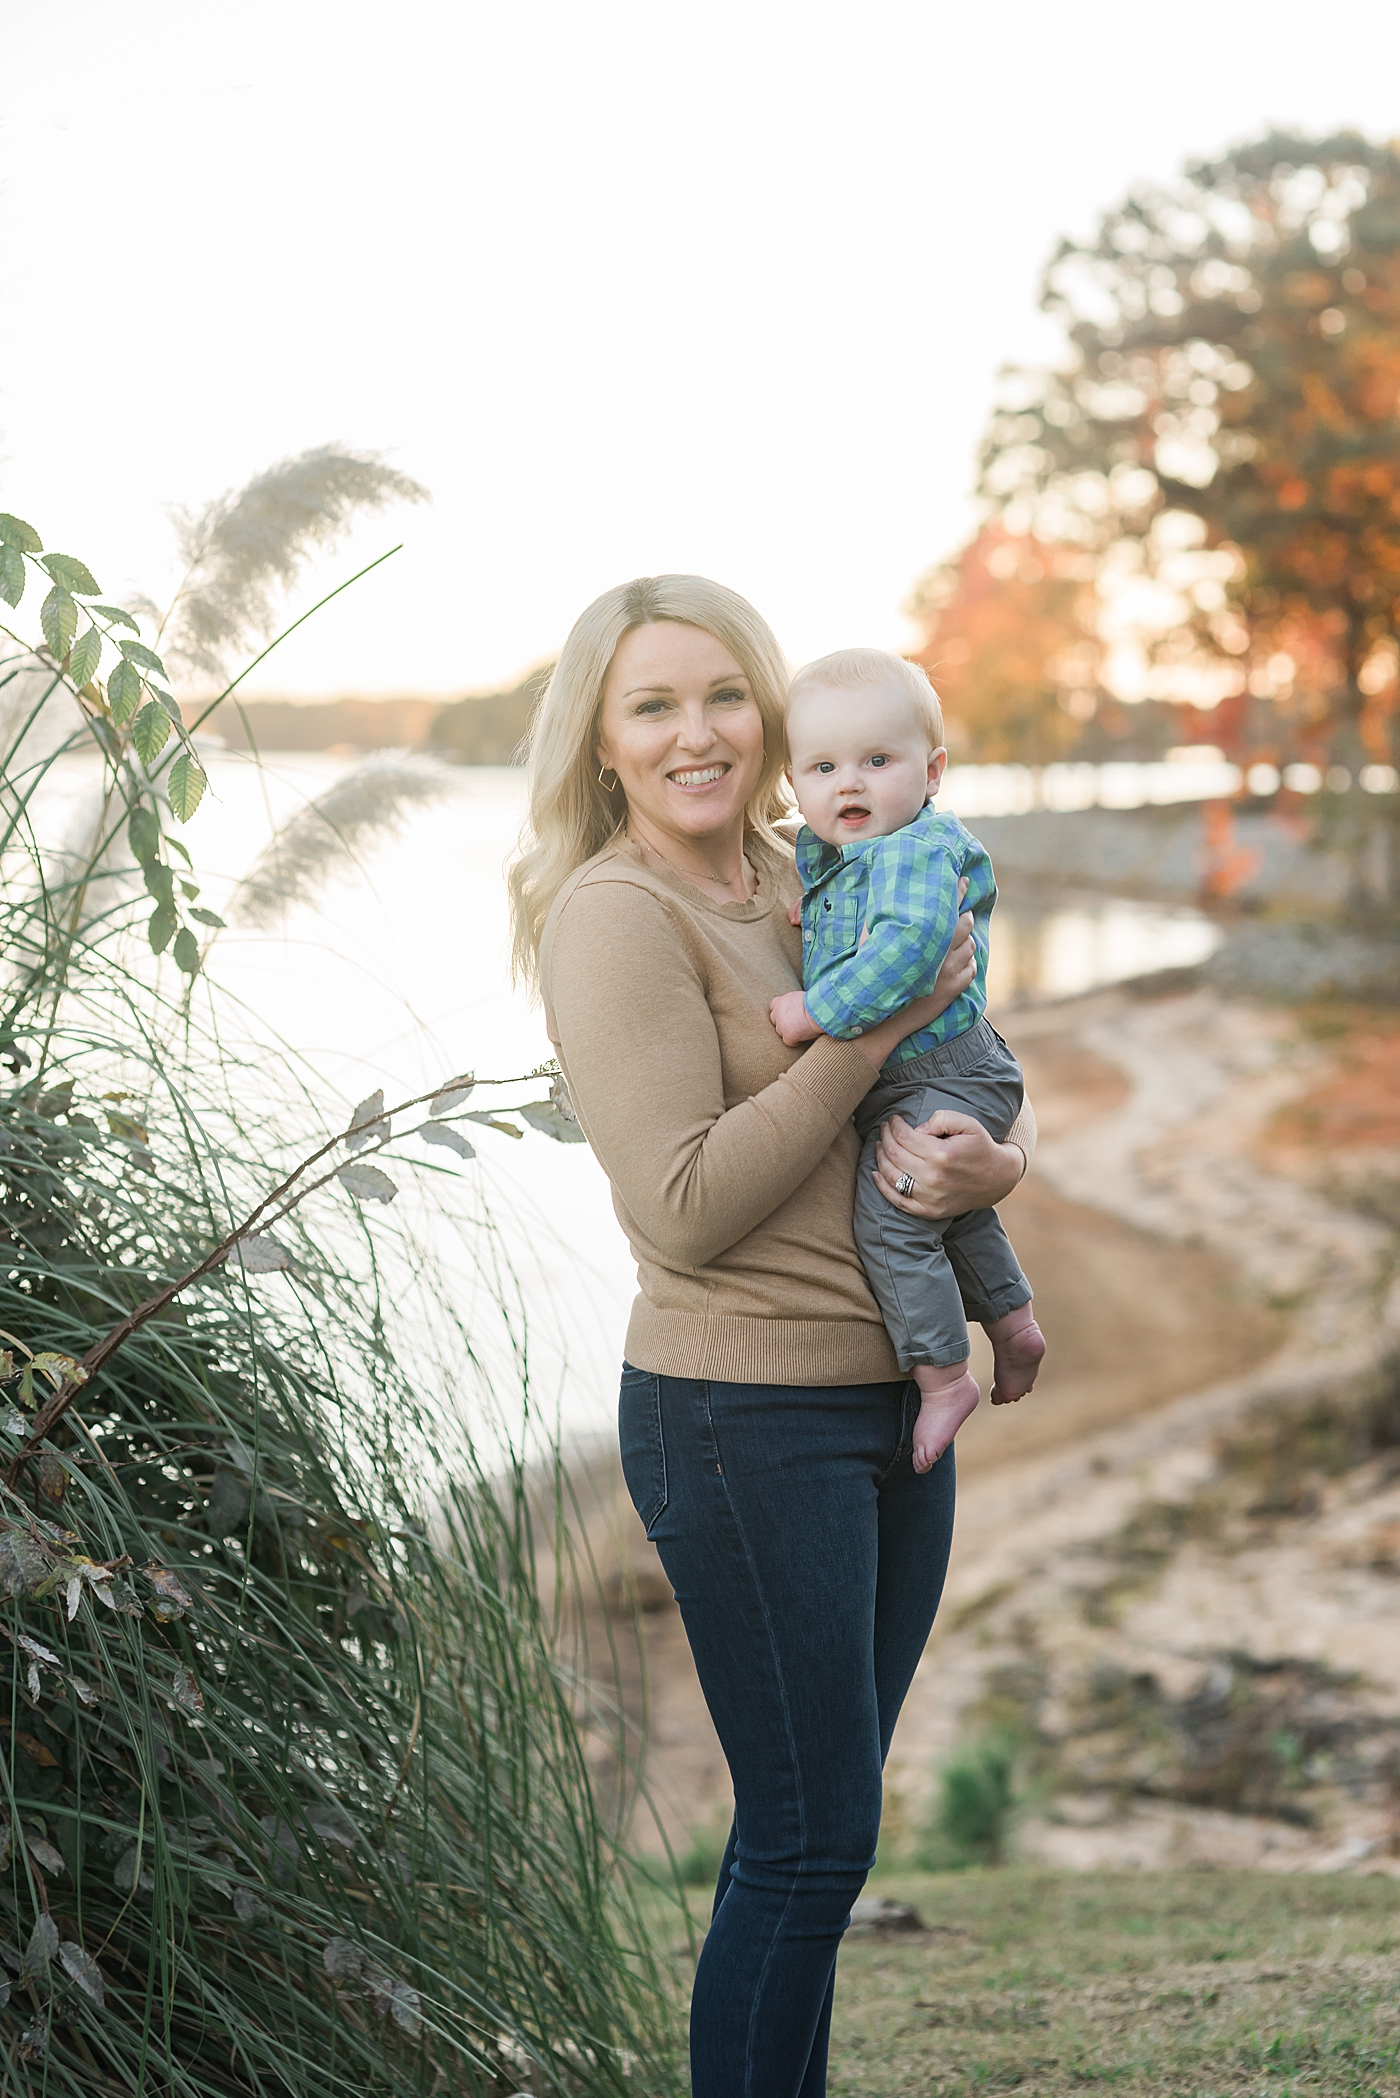 Mom smiling with baby boy | Photo by Denver NC Milestone Photographer Anna Wisjo 